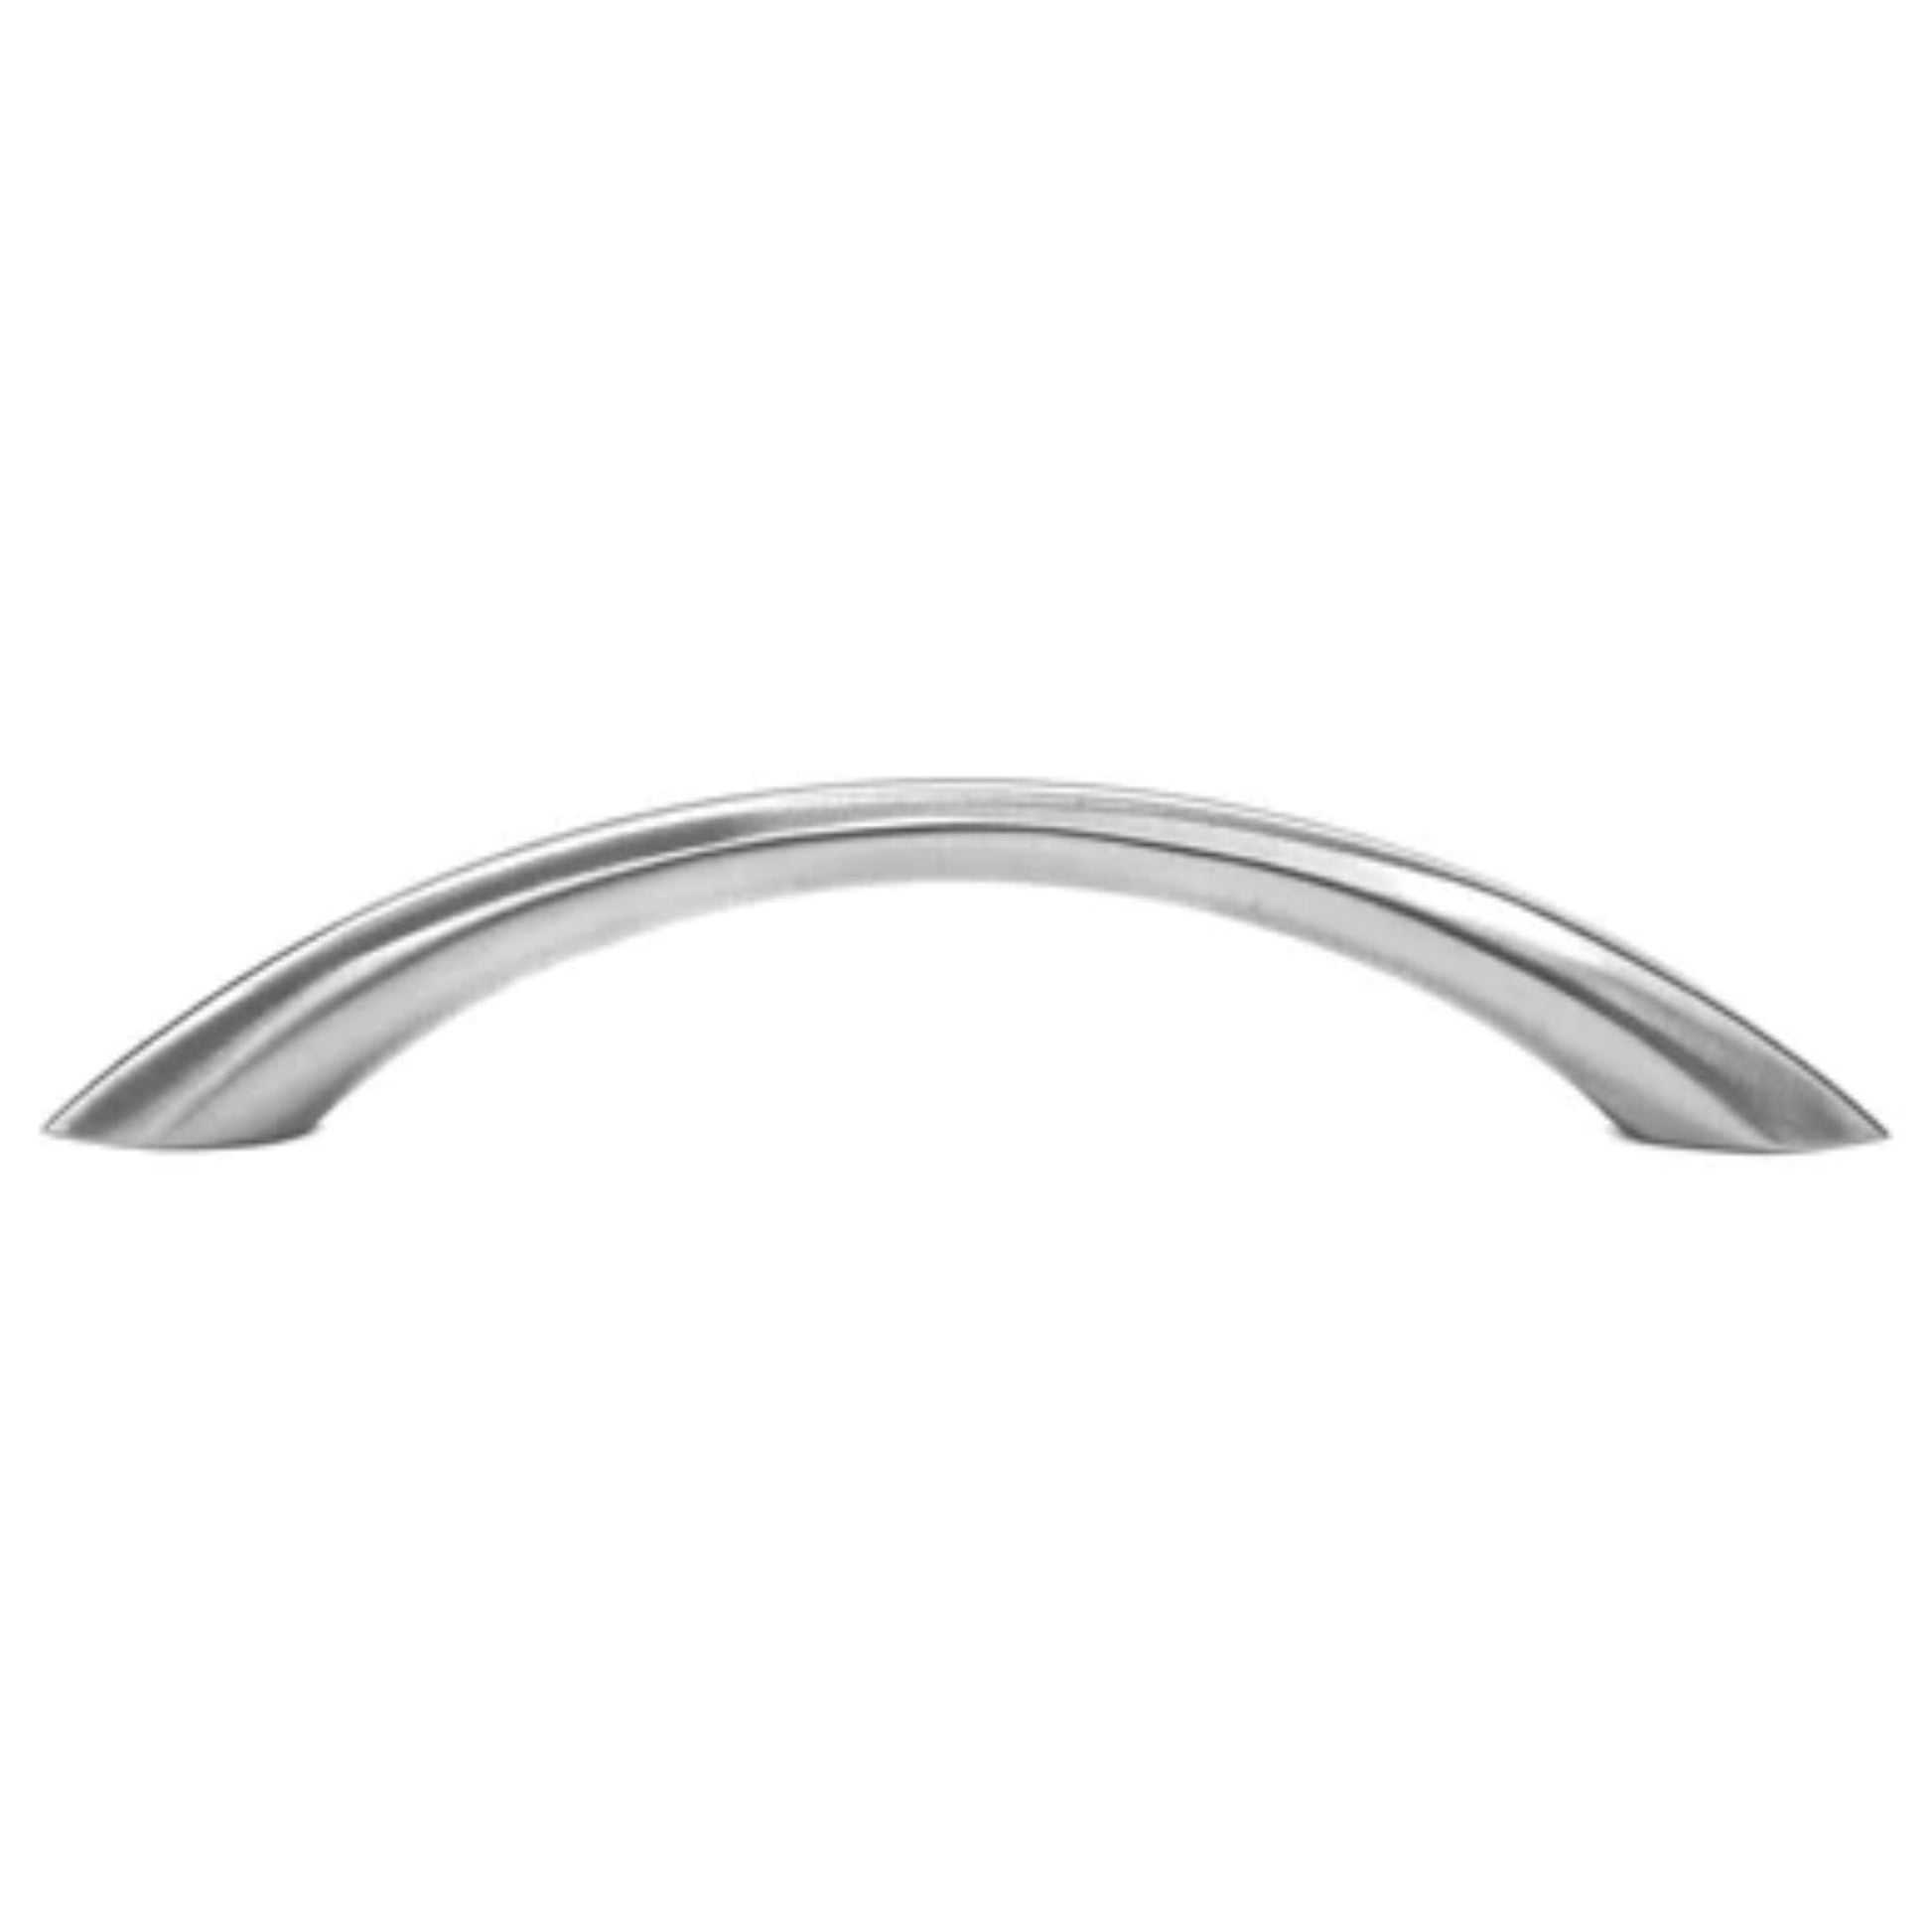 LessCare 4.375" Brushed Nickel Door/Drawer Pull P-2